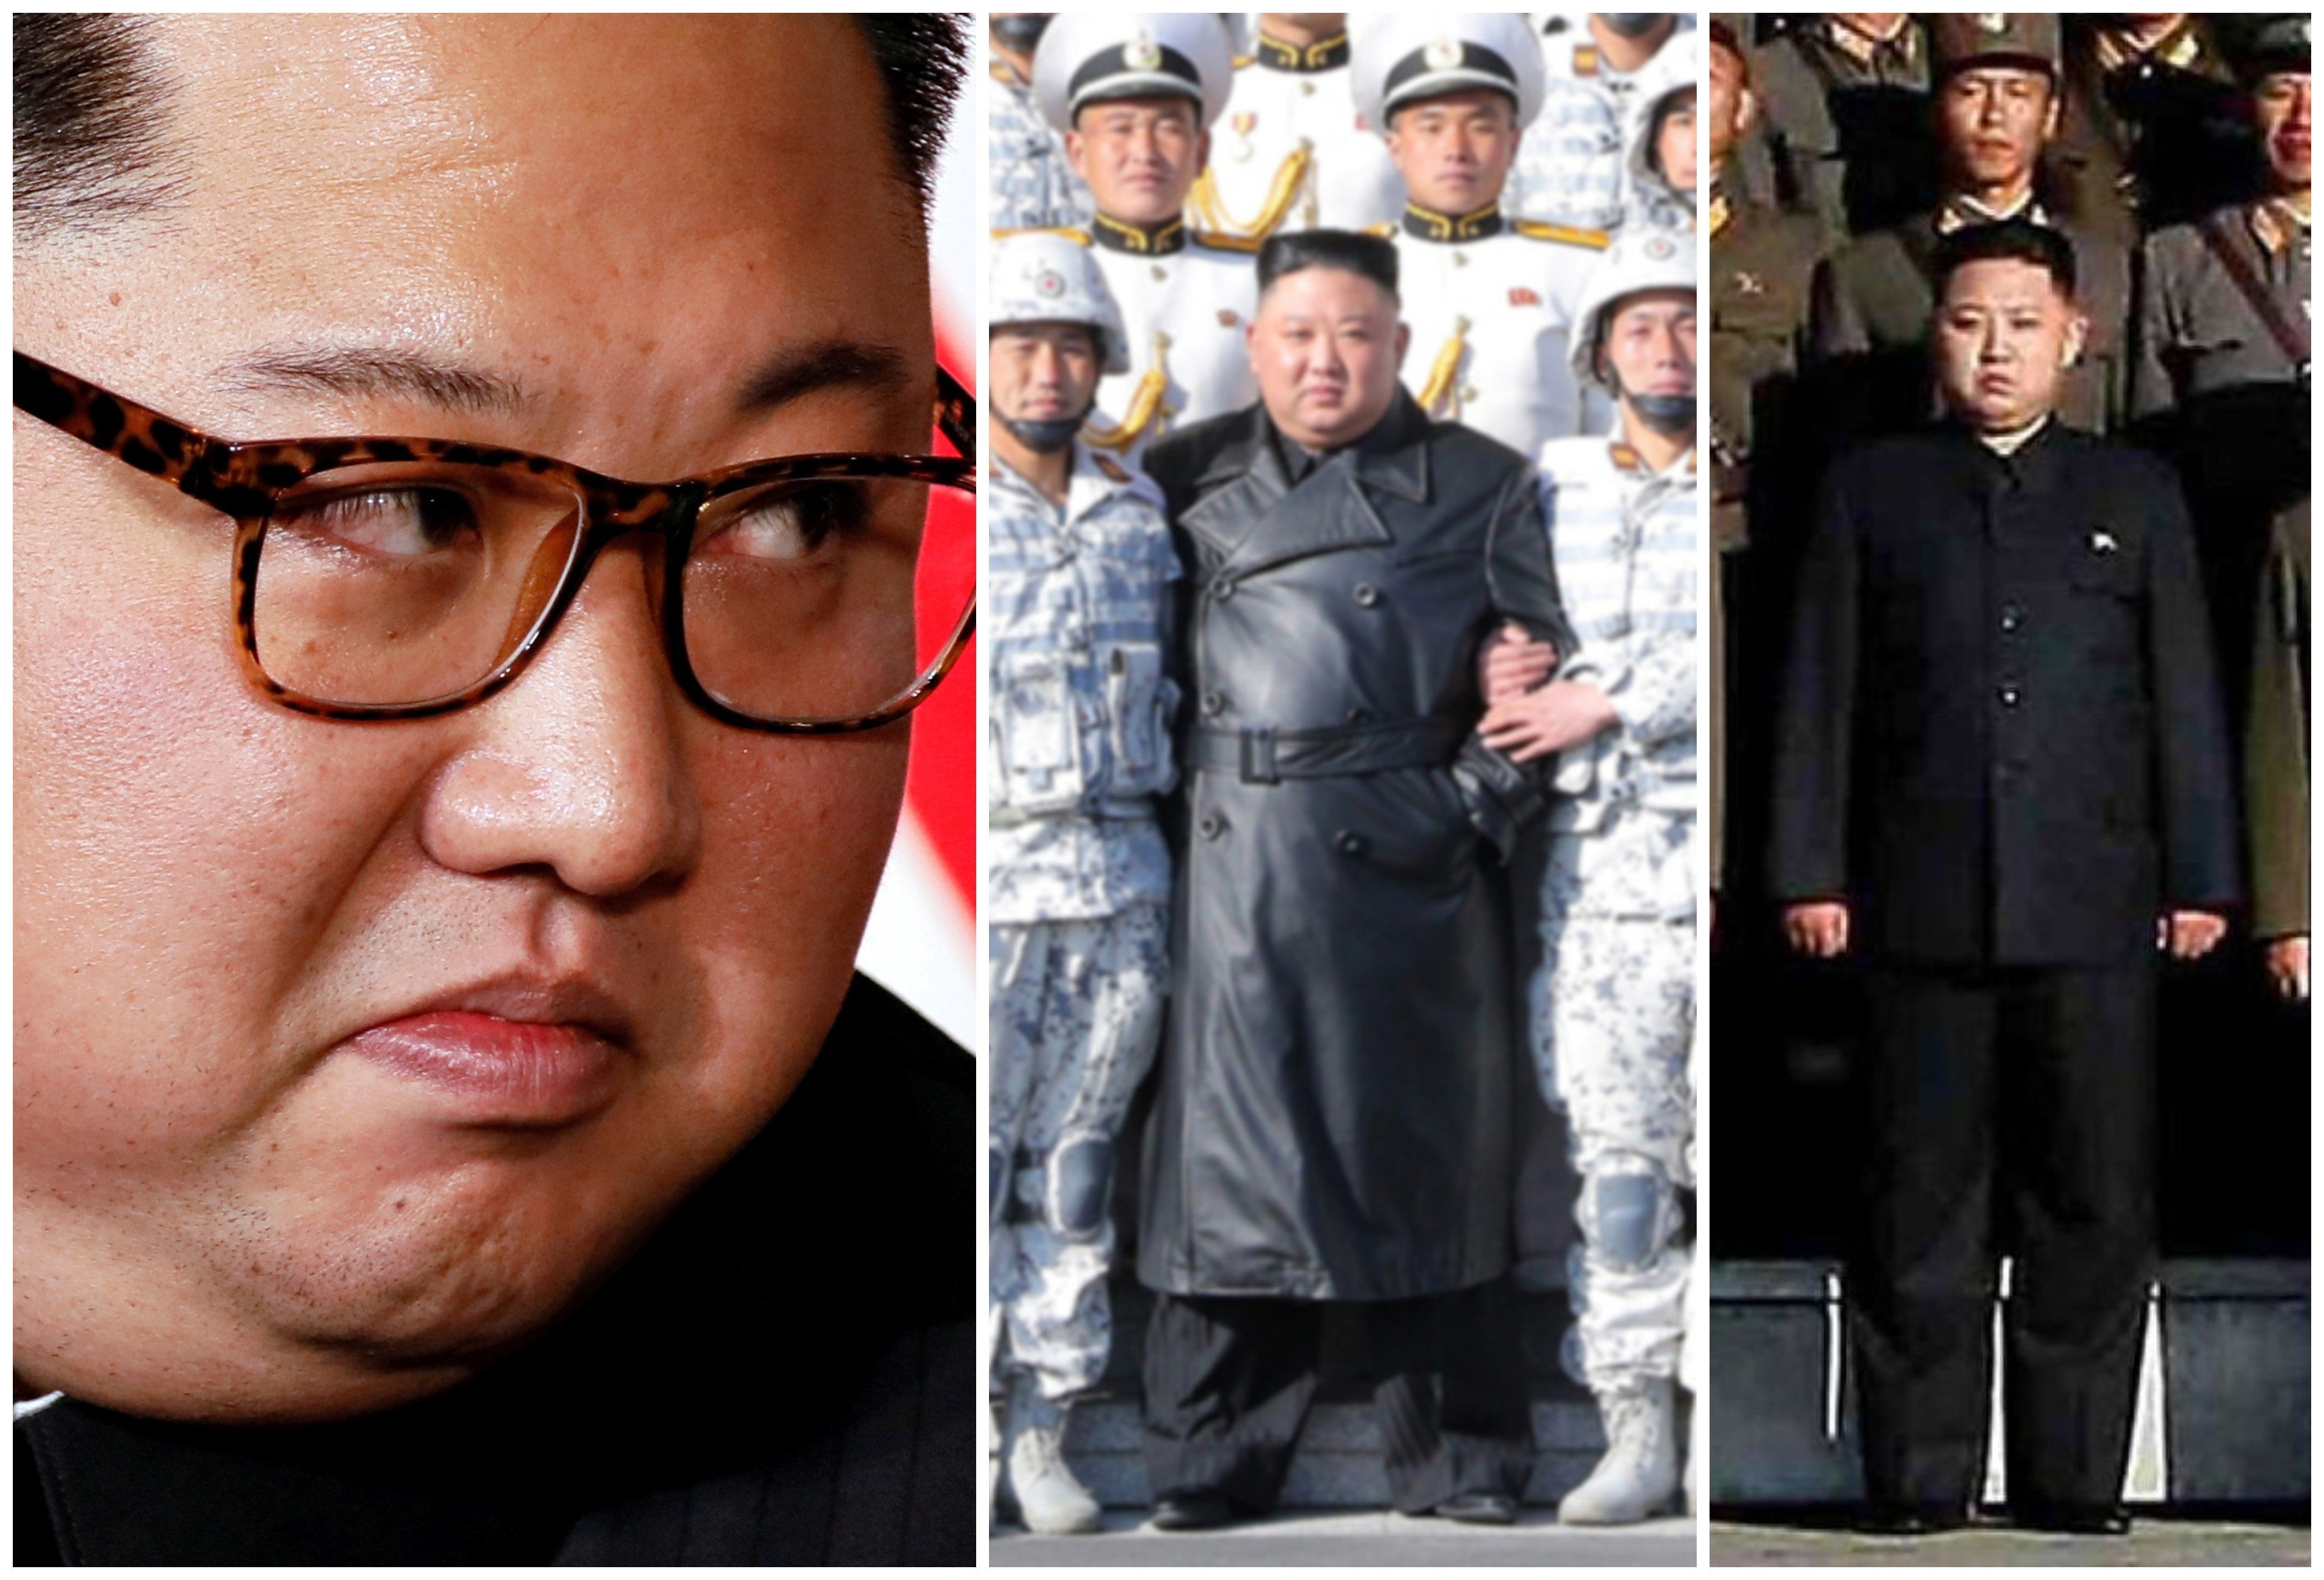 Kim Jong-un’s weight has provoked concerns about the North Korean leader’s health. Photos: Reuters, @martyn_williams/Twitter